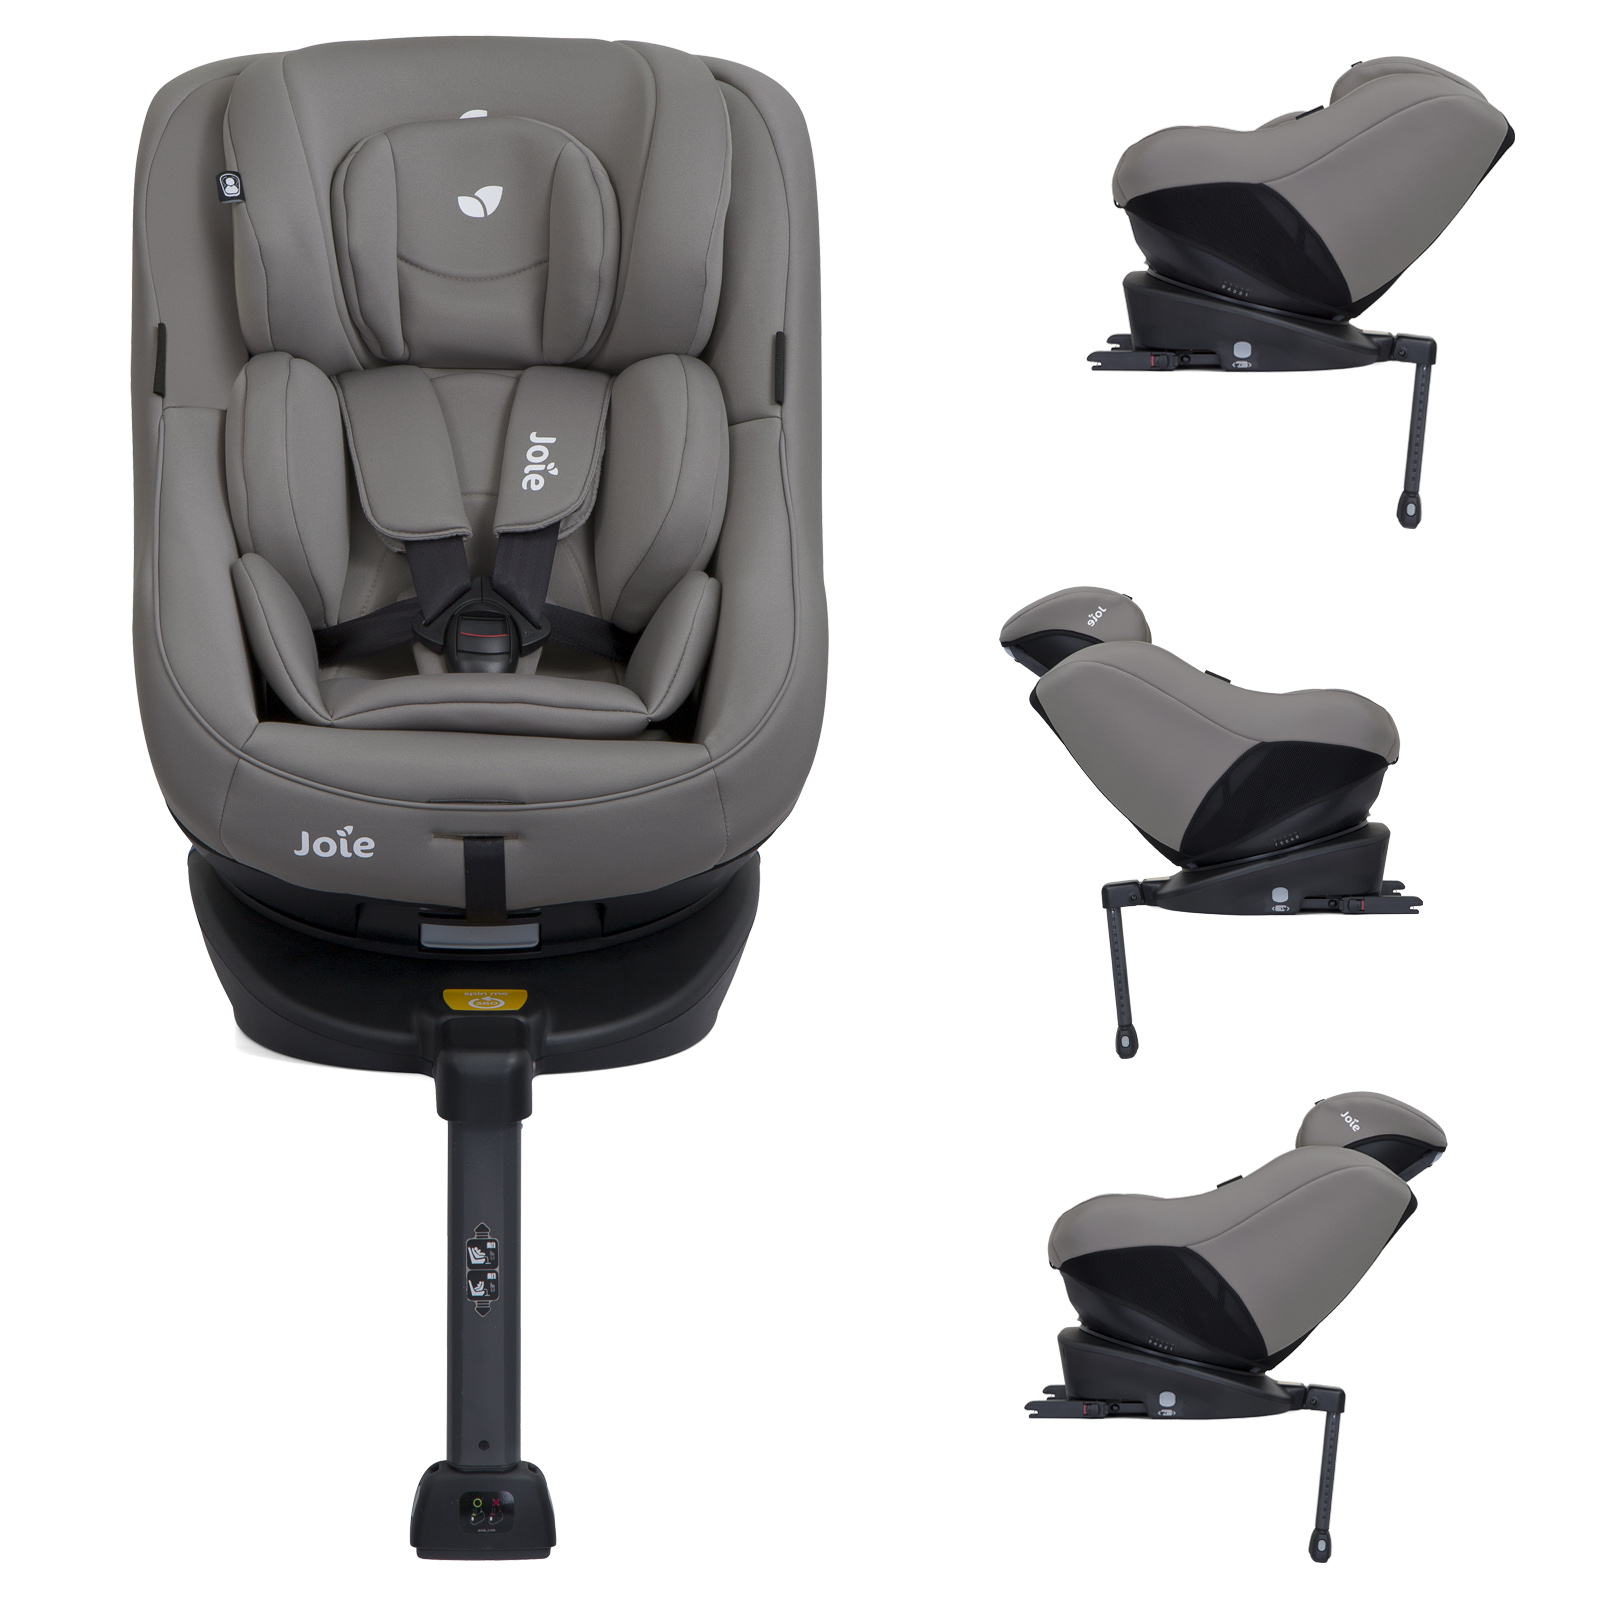 Joie Spin 360 Group 0+/1 ISOFIX Car Seat - Grey Flannel...